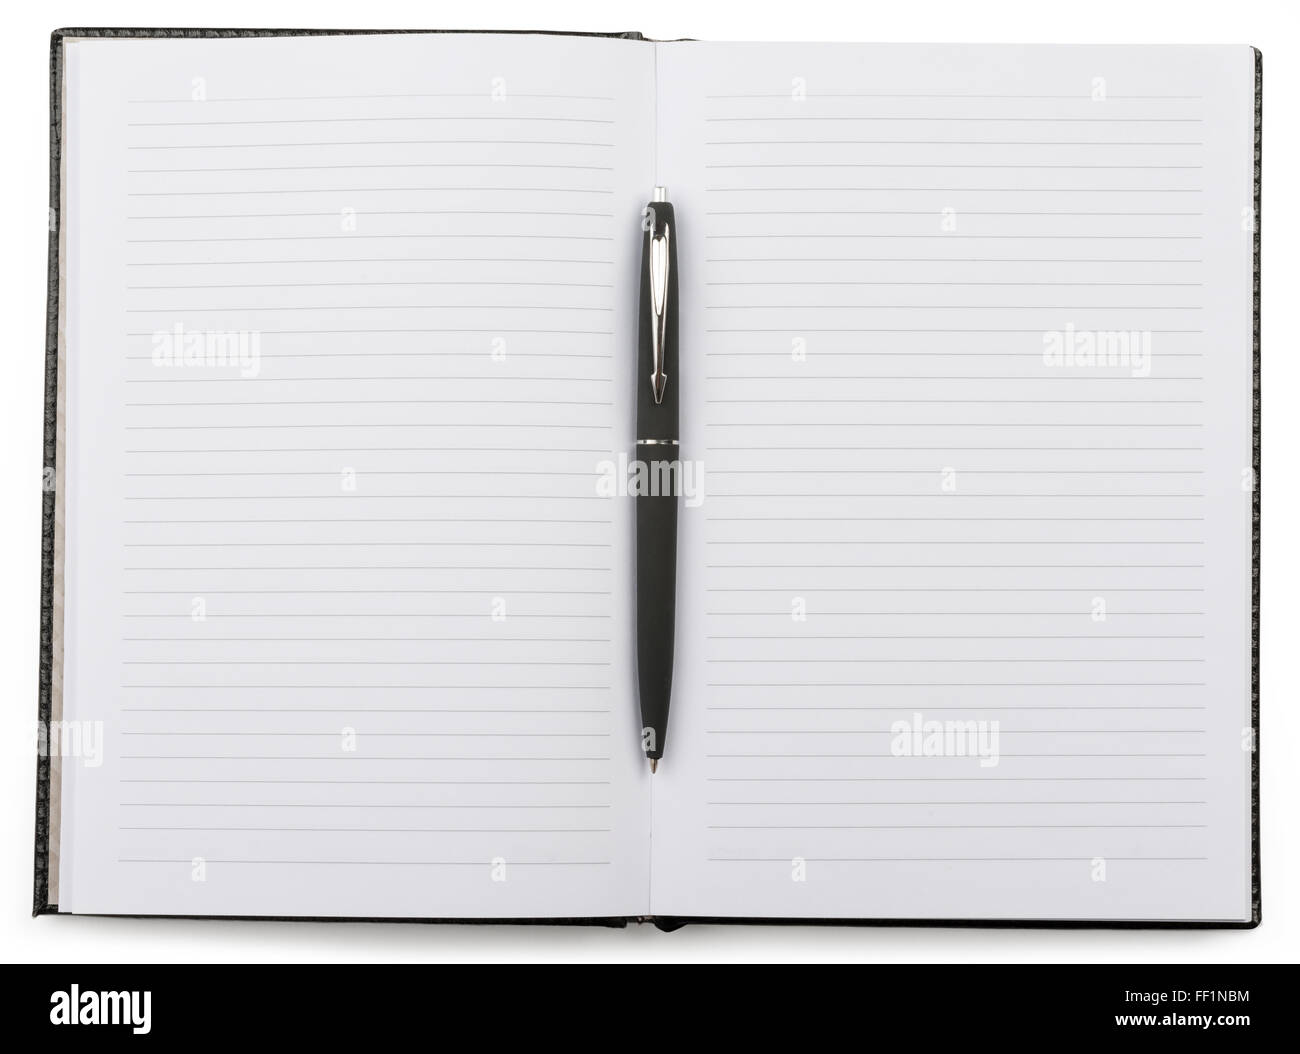 Open notebook with a pen lying in the middle Stock Photo